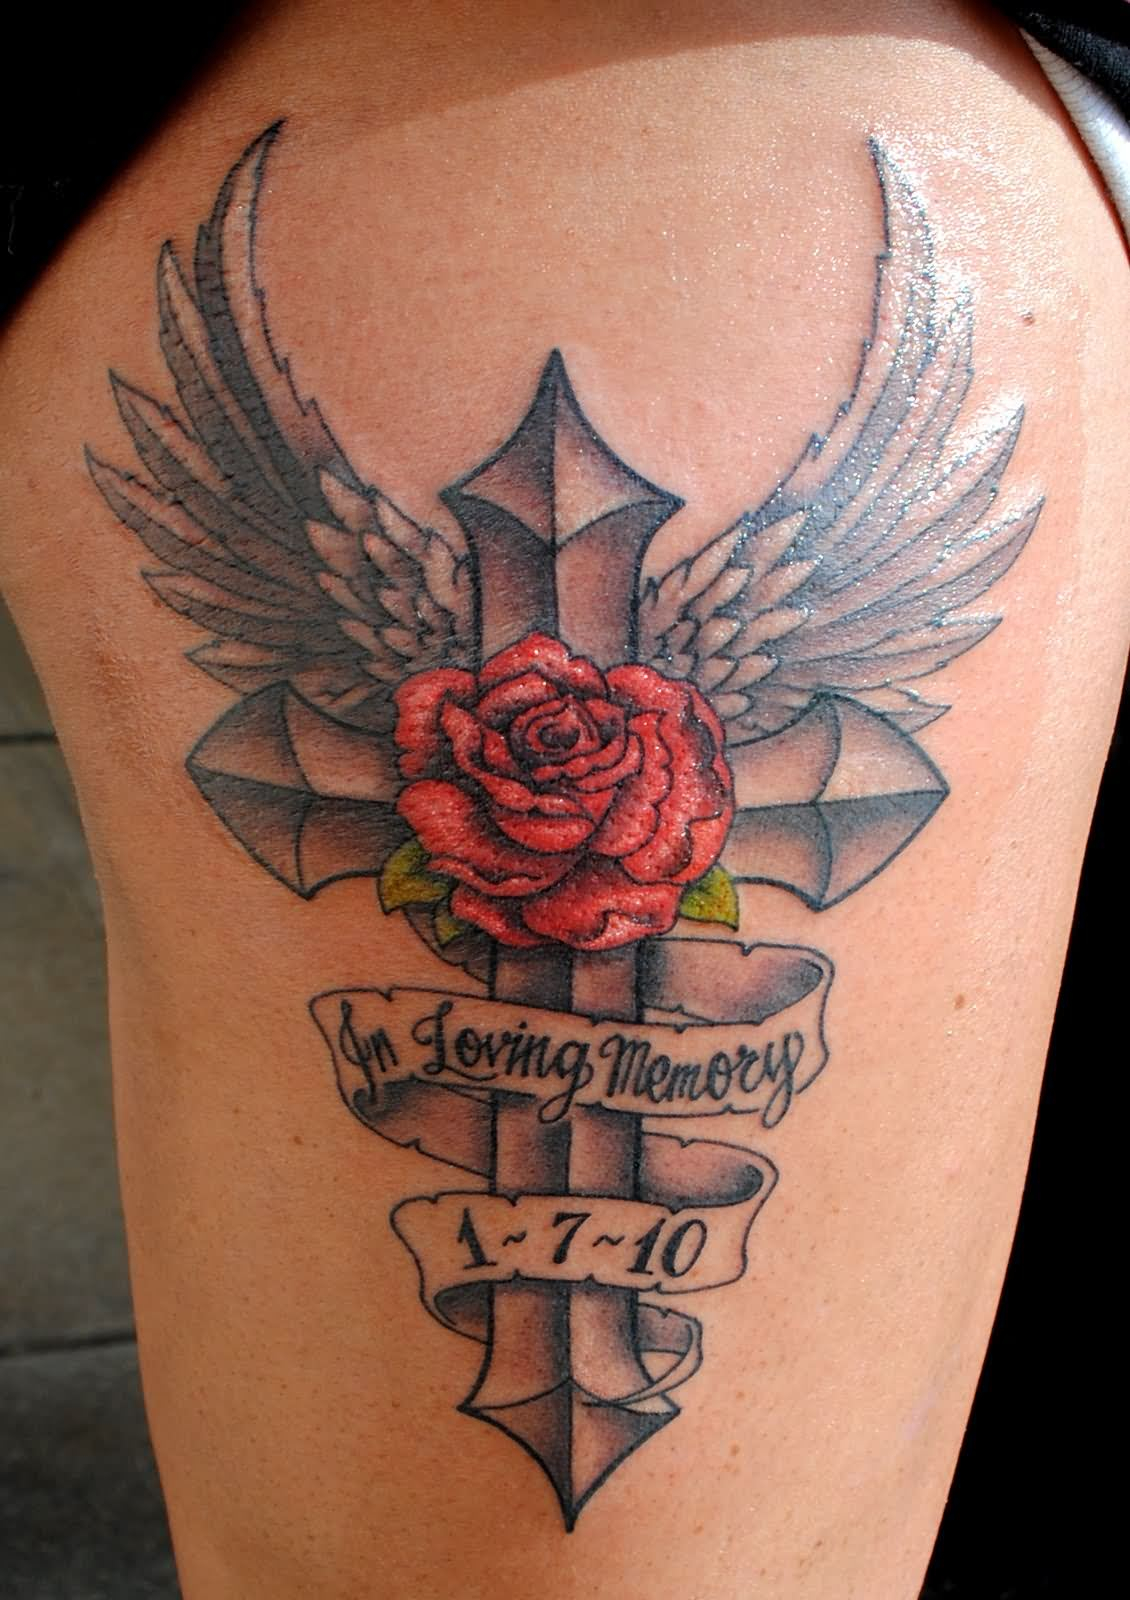 In Loving Memory With Cross Angel Wings Tattoo intended for sizing 1130 X 1600